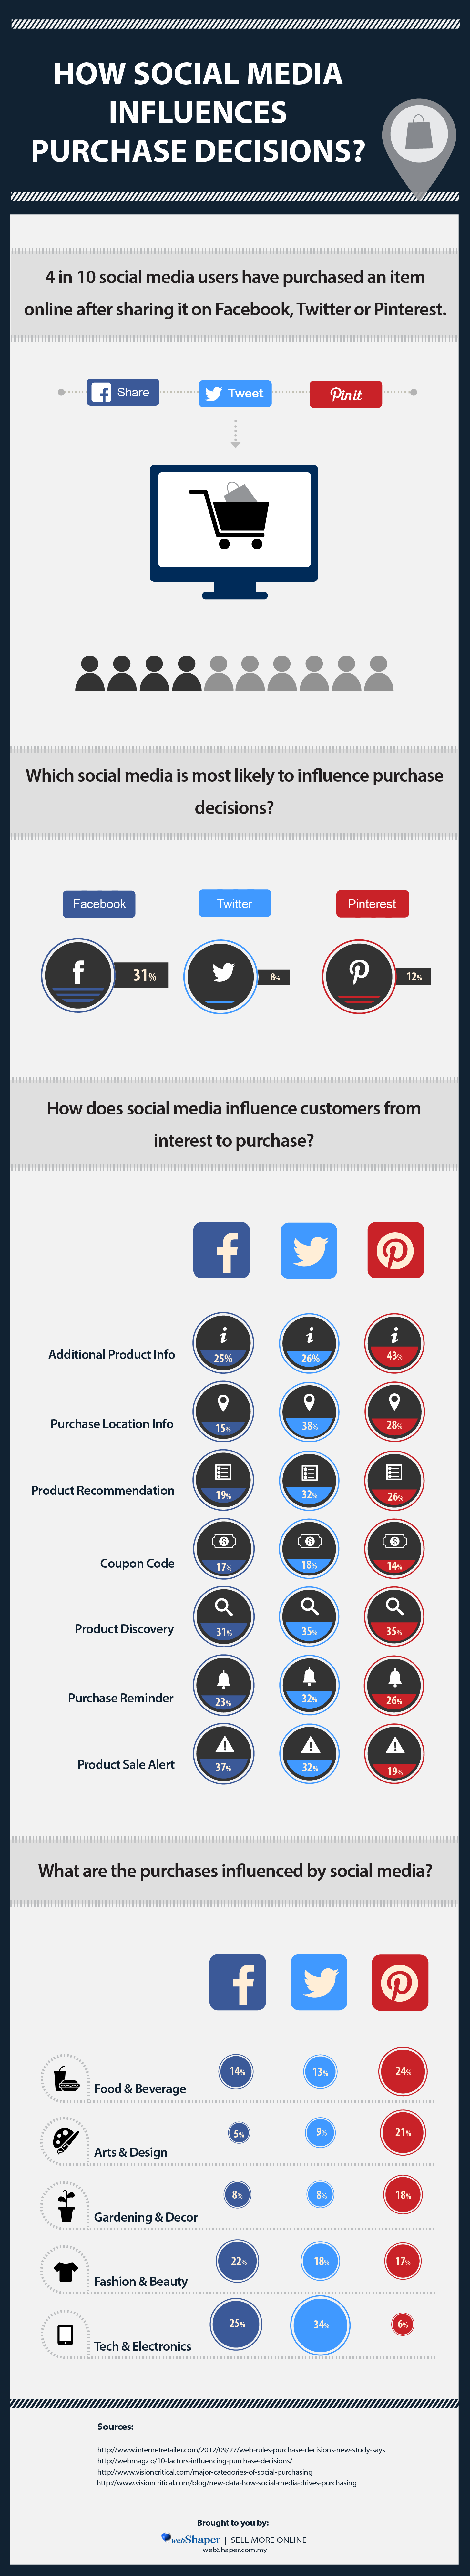 social media influence on purchase decisions